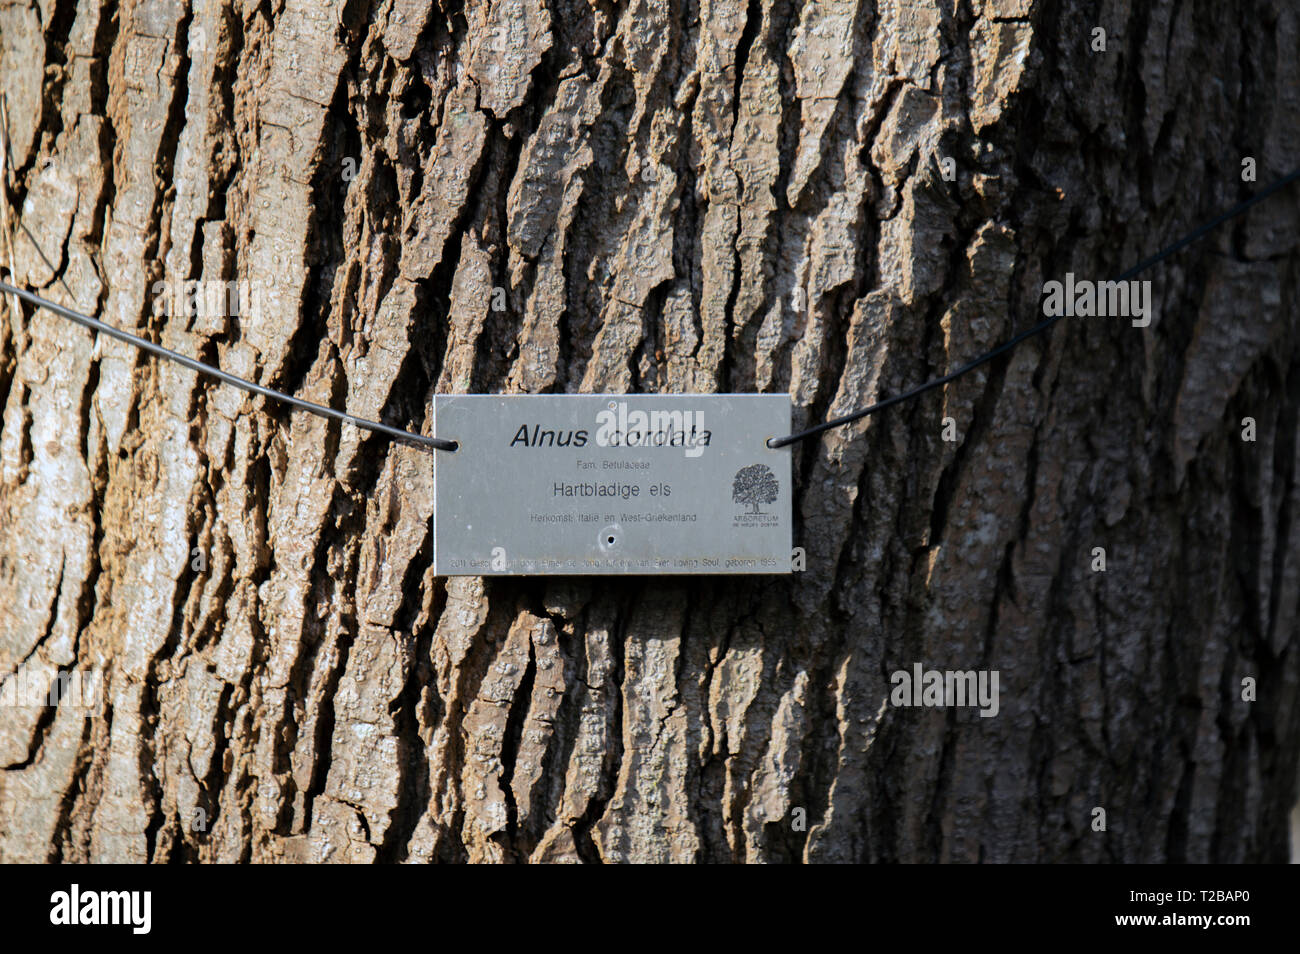 Sign Of A Alnus Cordata Tree At De Nieuwe Ooster At Amsterdam The Netherlands 2019 Stock Photo